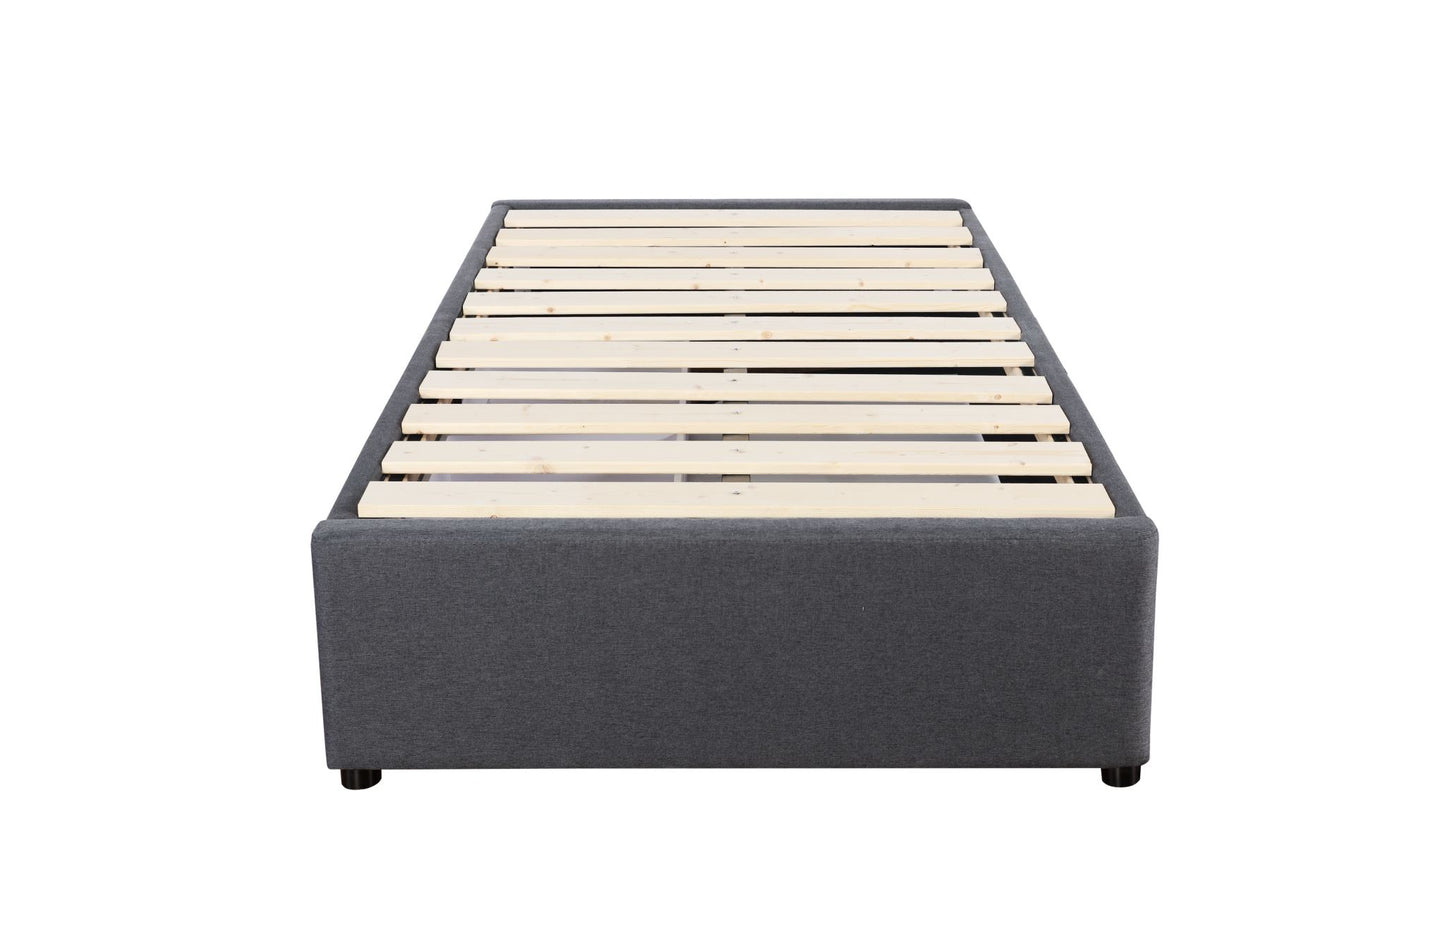 Bed Bases with 2 Drawers  - Single - Charcoal